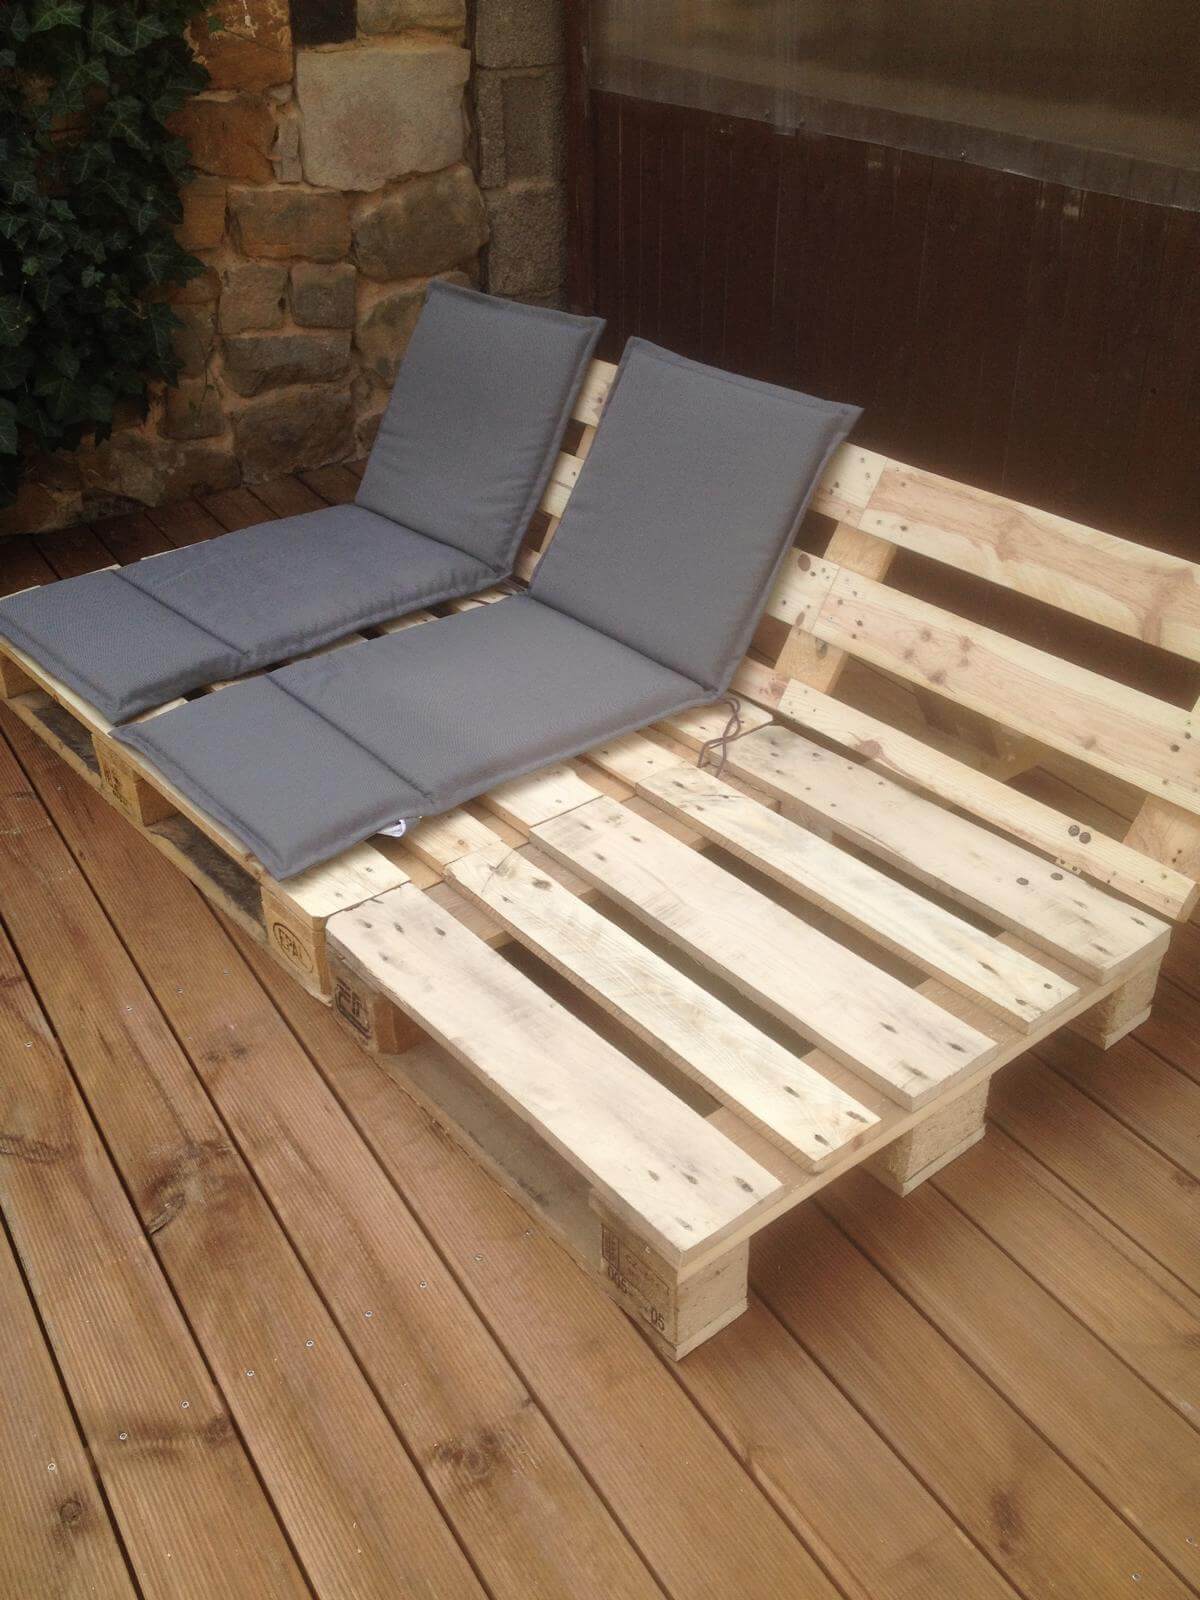 16 Amazing DIY Pallet Wood Furniture Ideas For Your Porch